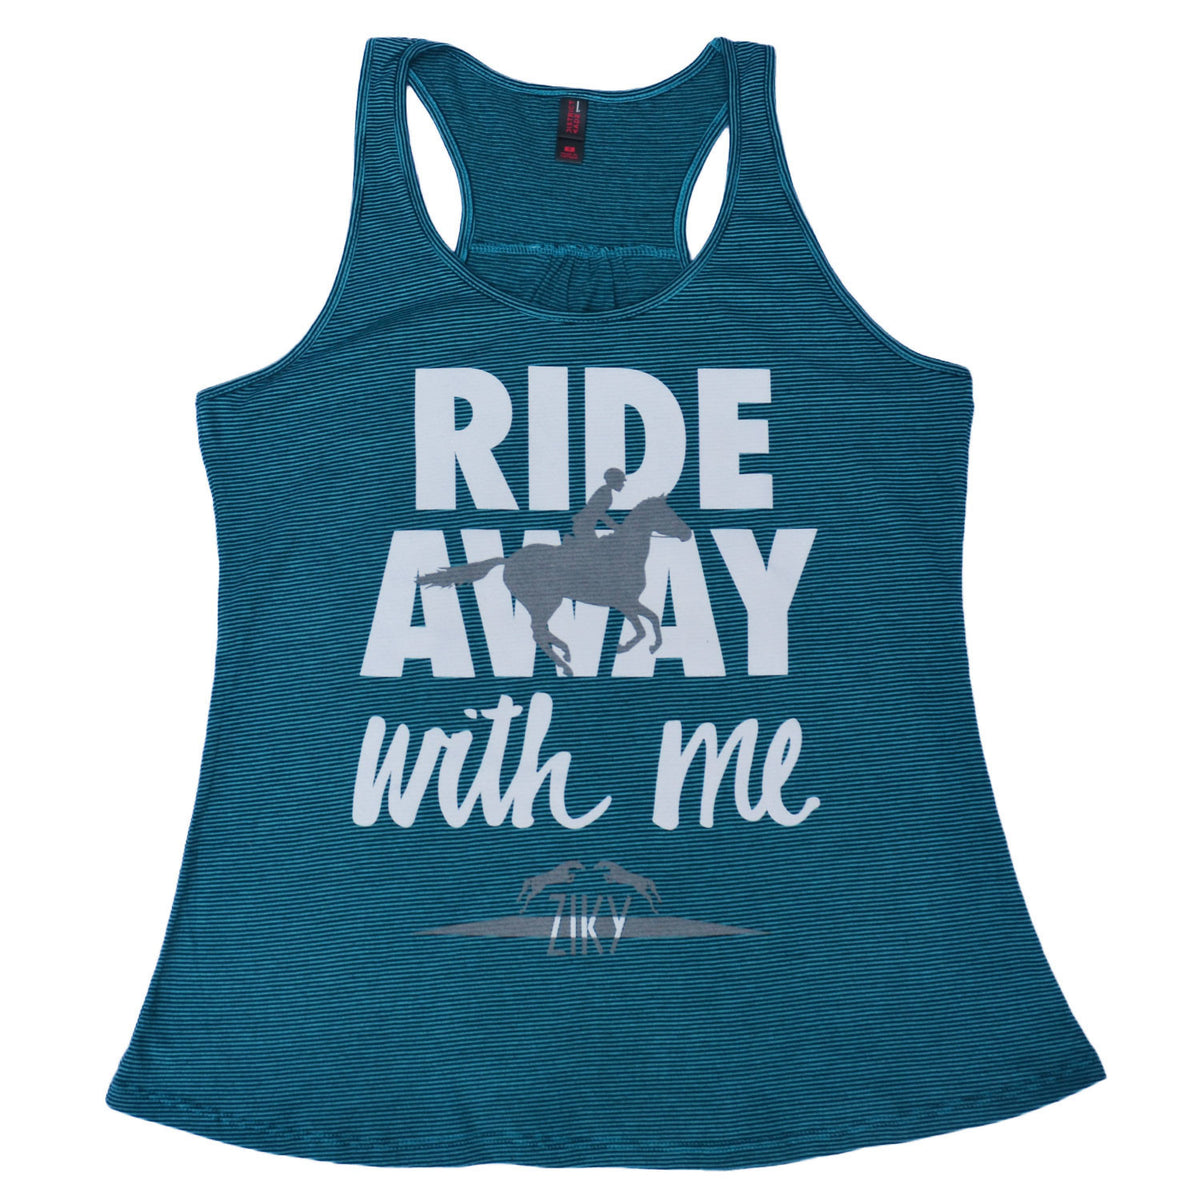 Ride Away With Me tank top